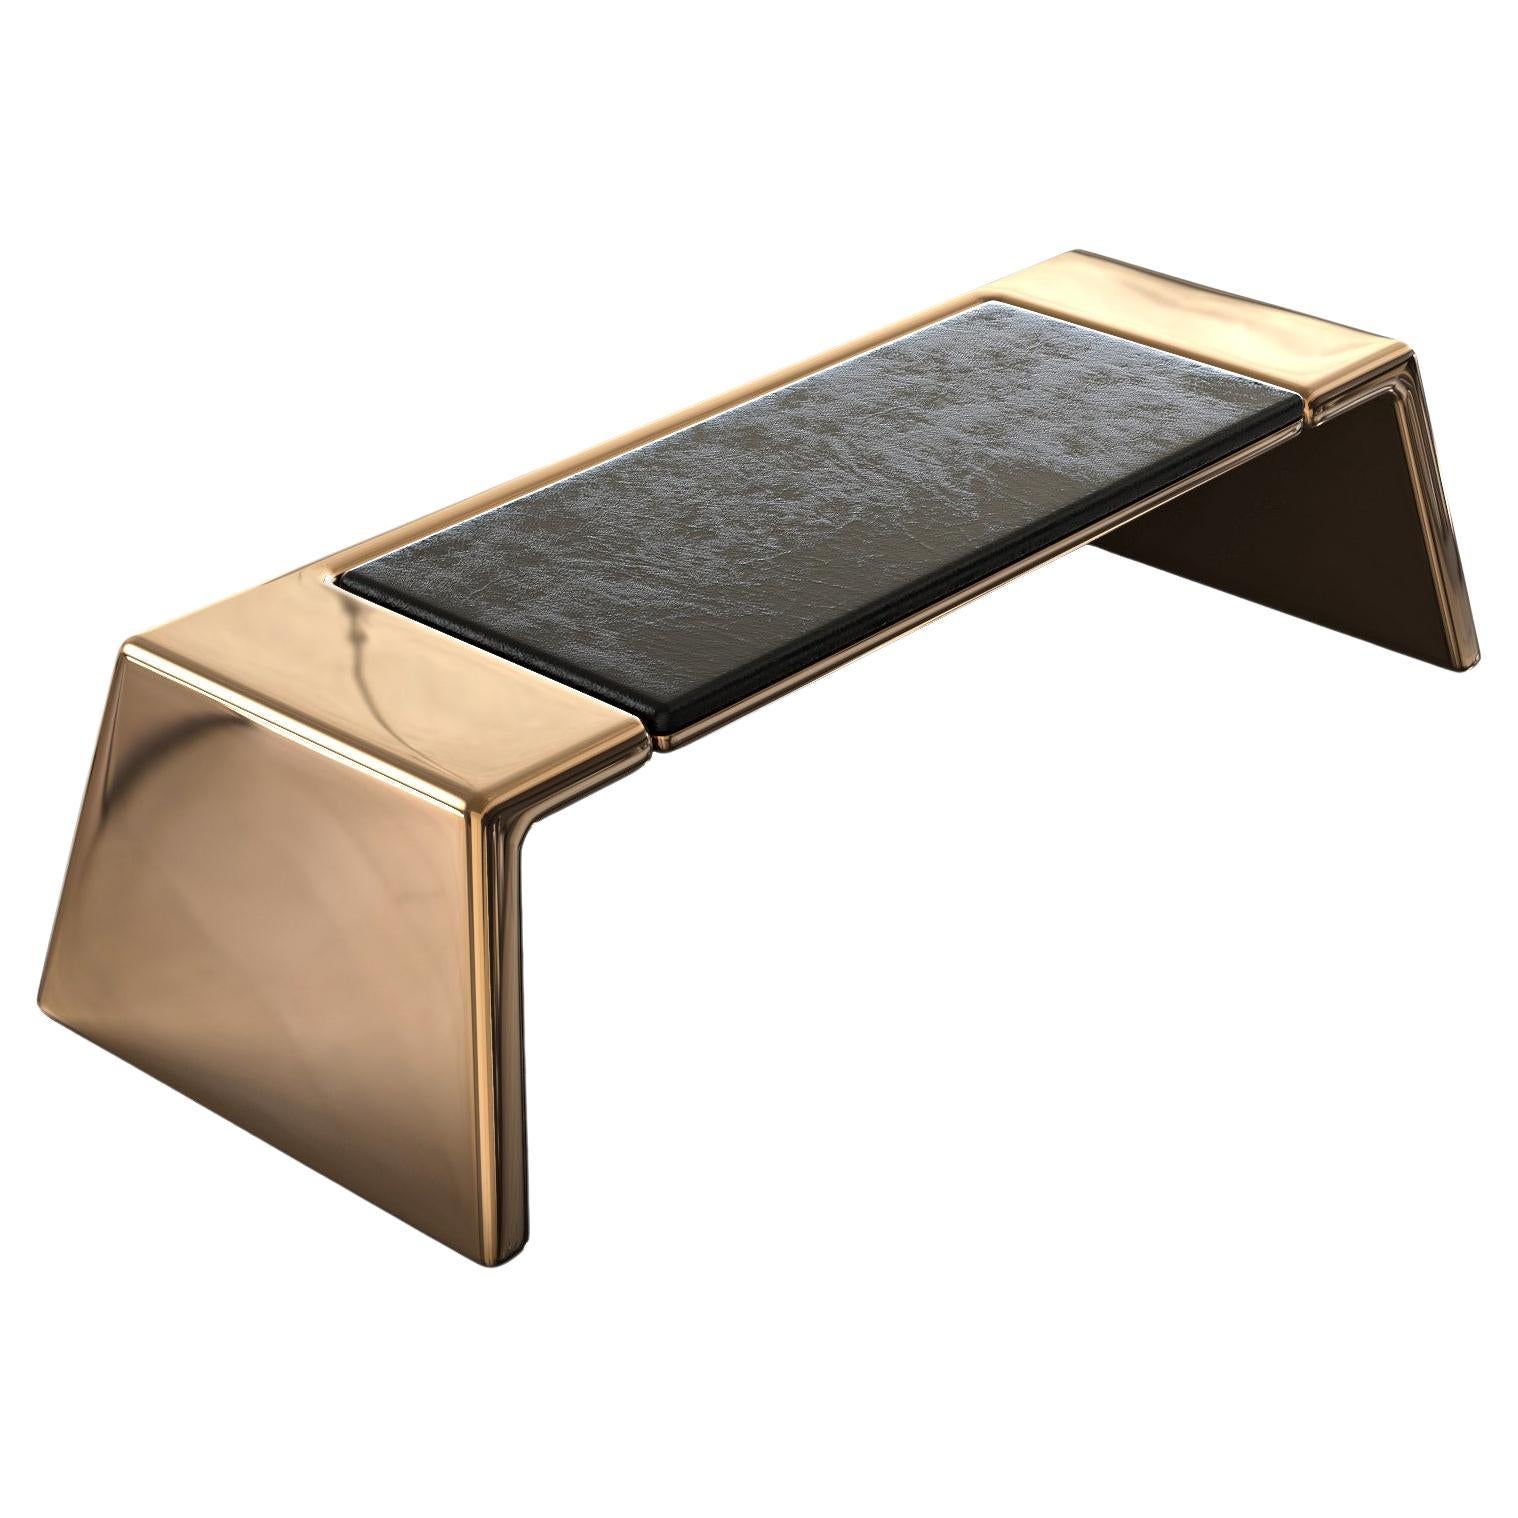 "Amendola" Bench with Bronze, Handcrafted, Istanbul